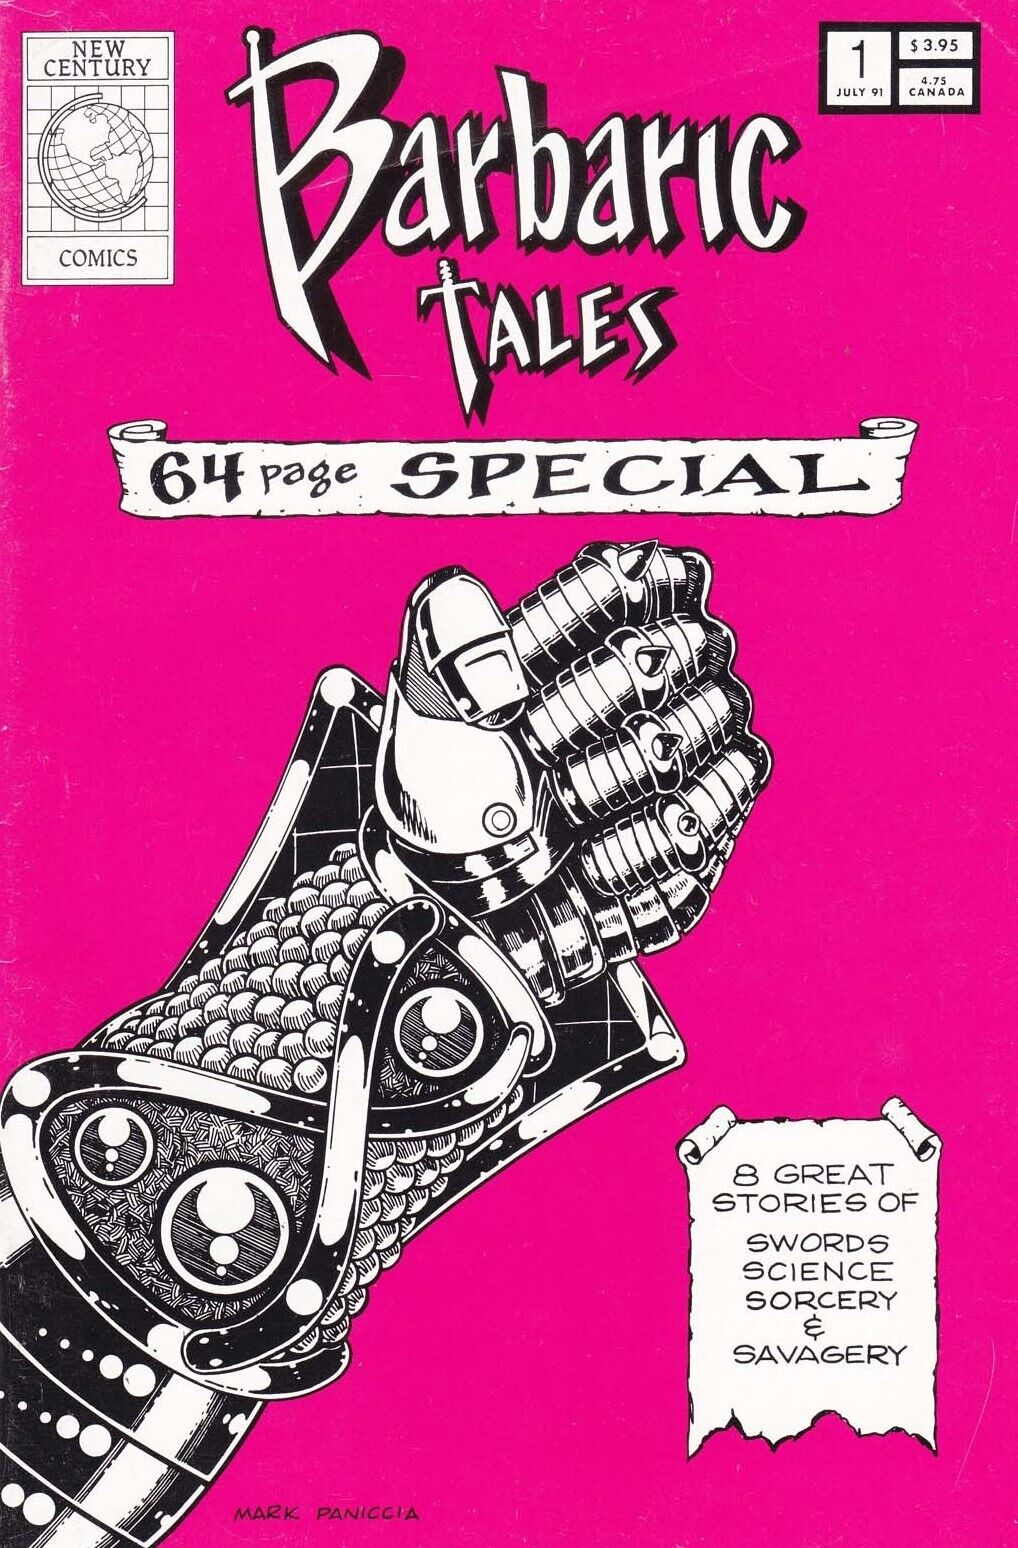 Barbaric Tales 64 Page Special #1 VG; New Century | low grade comic - we combine